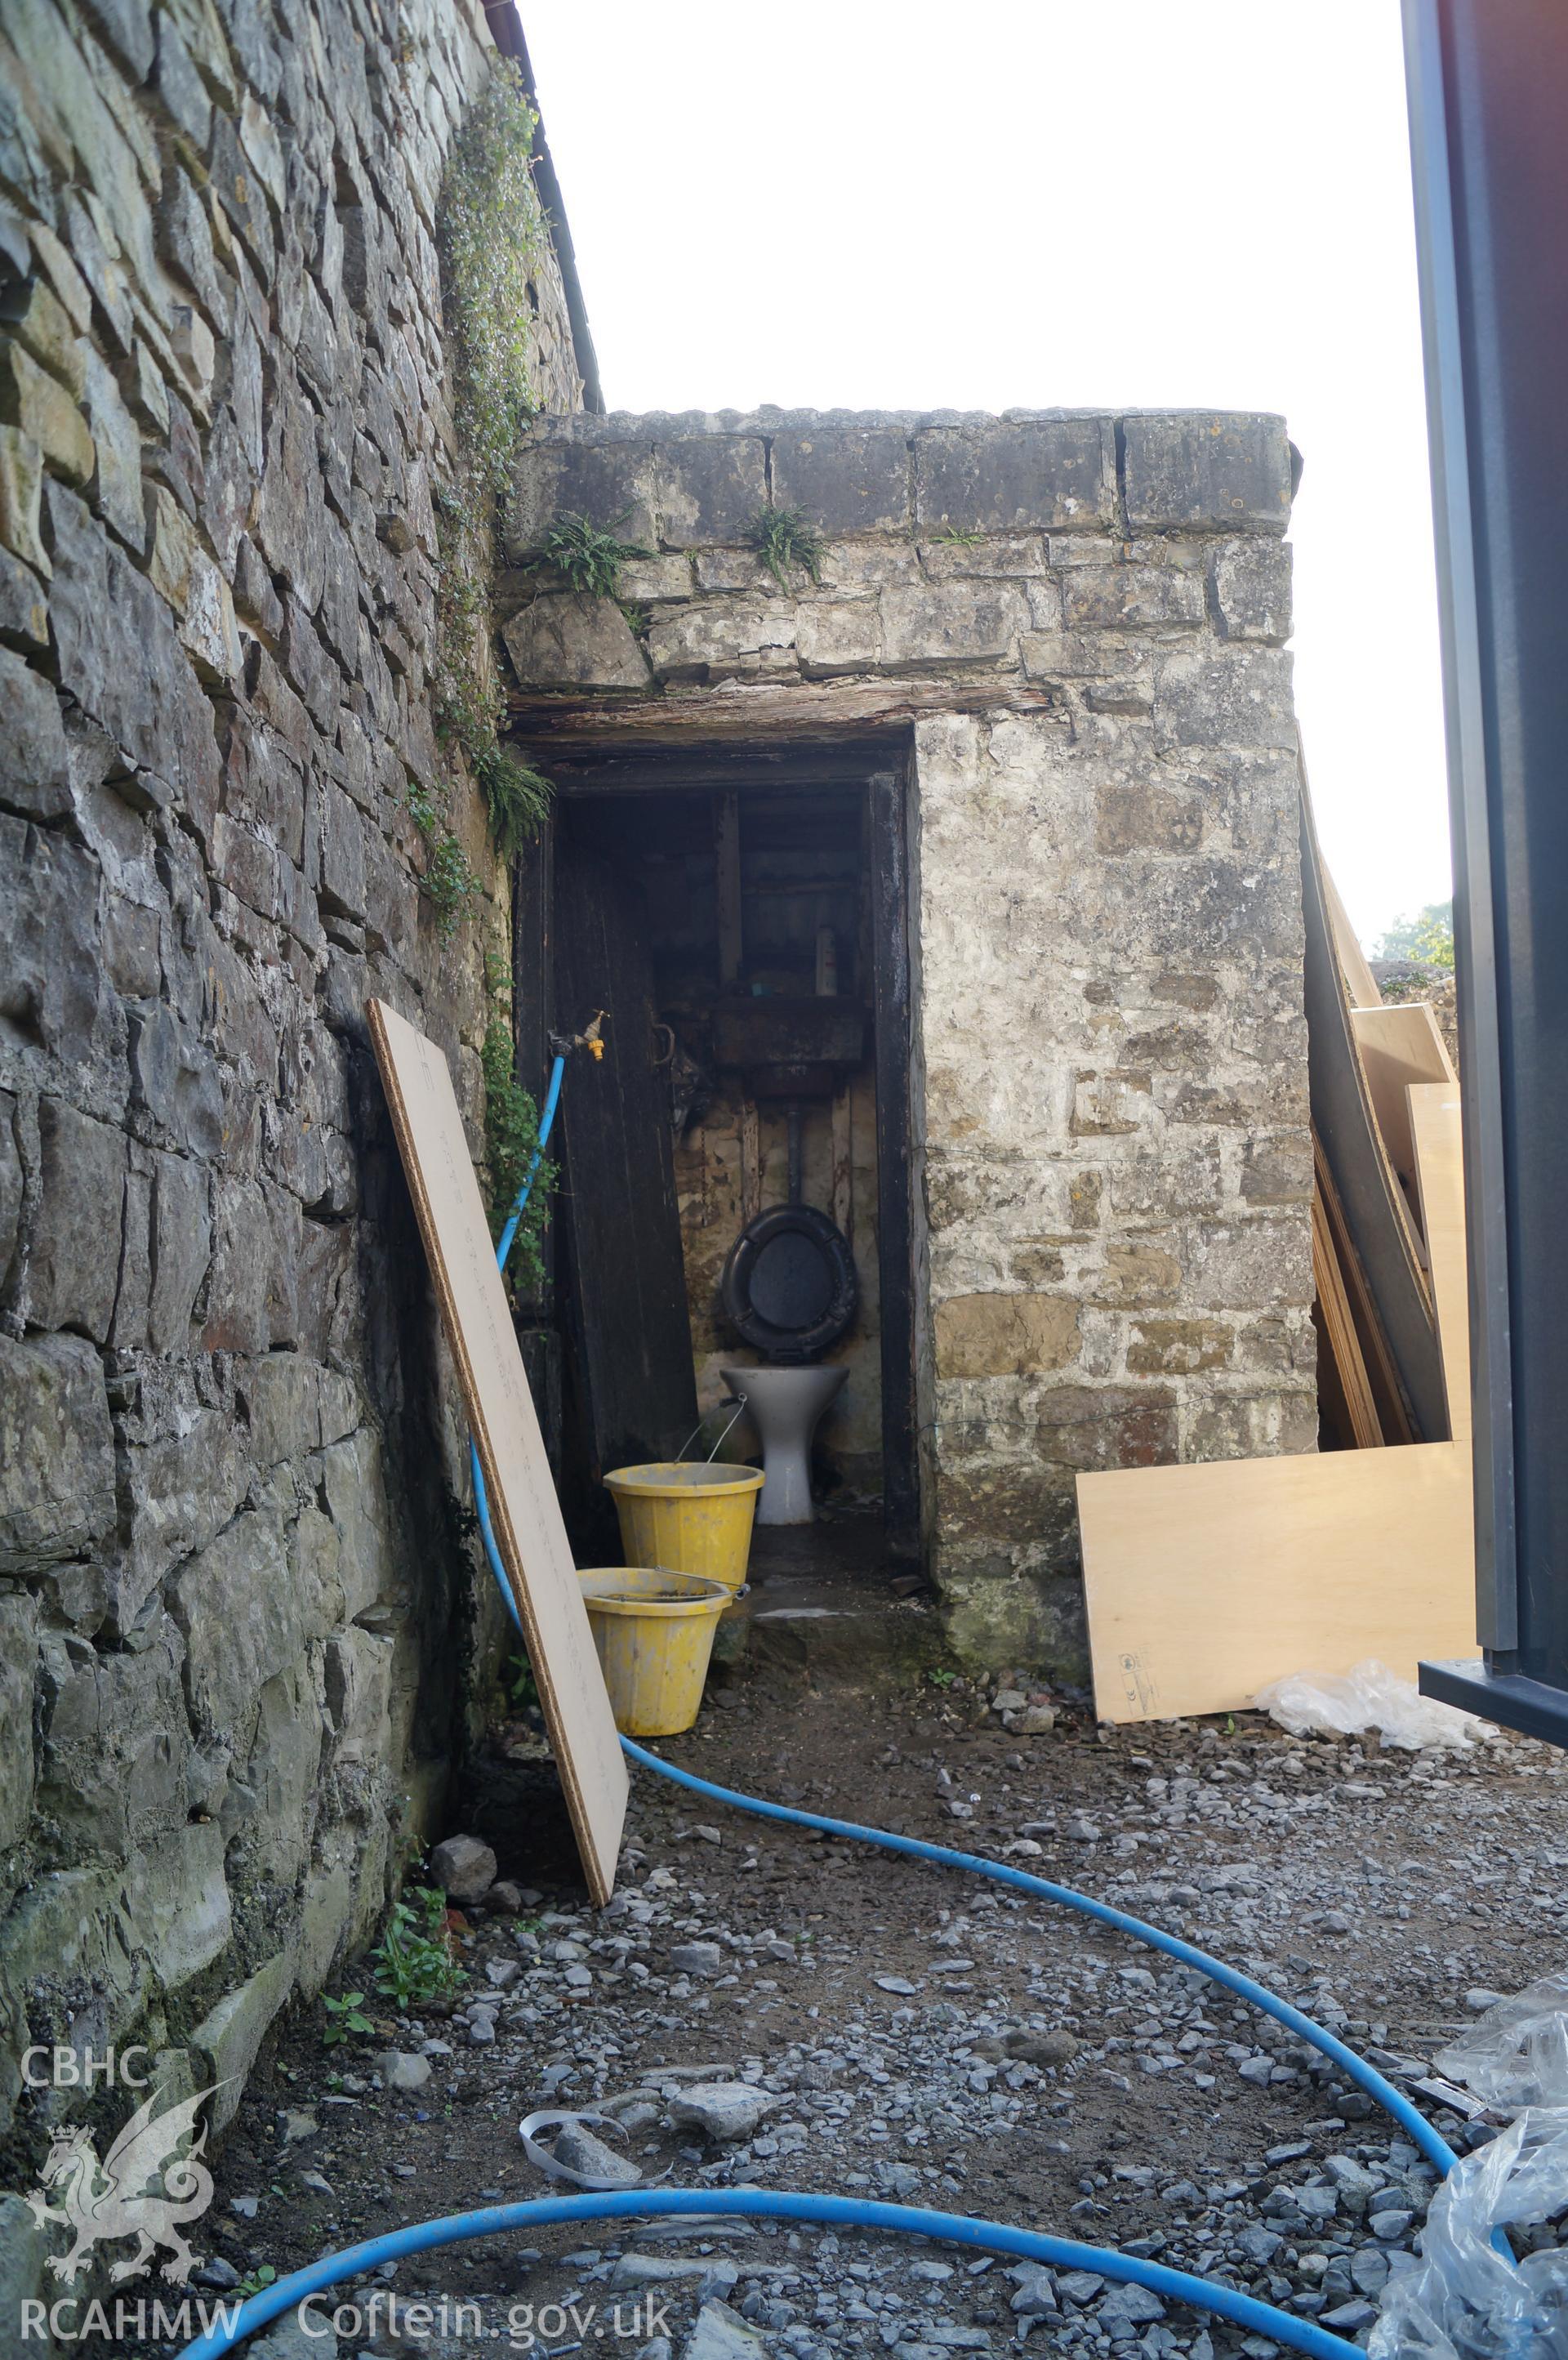 View 'looking west southwest at the outside toilet' at Rowley Court, Llantwit Major. Photograph & description by Jenny Hall & Paul Sambrook of Trysor, 7th September 2016.